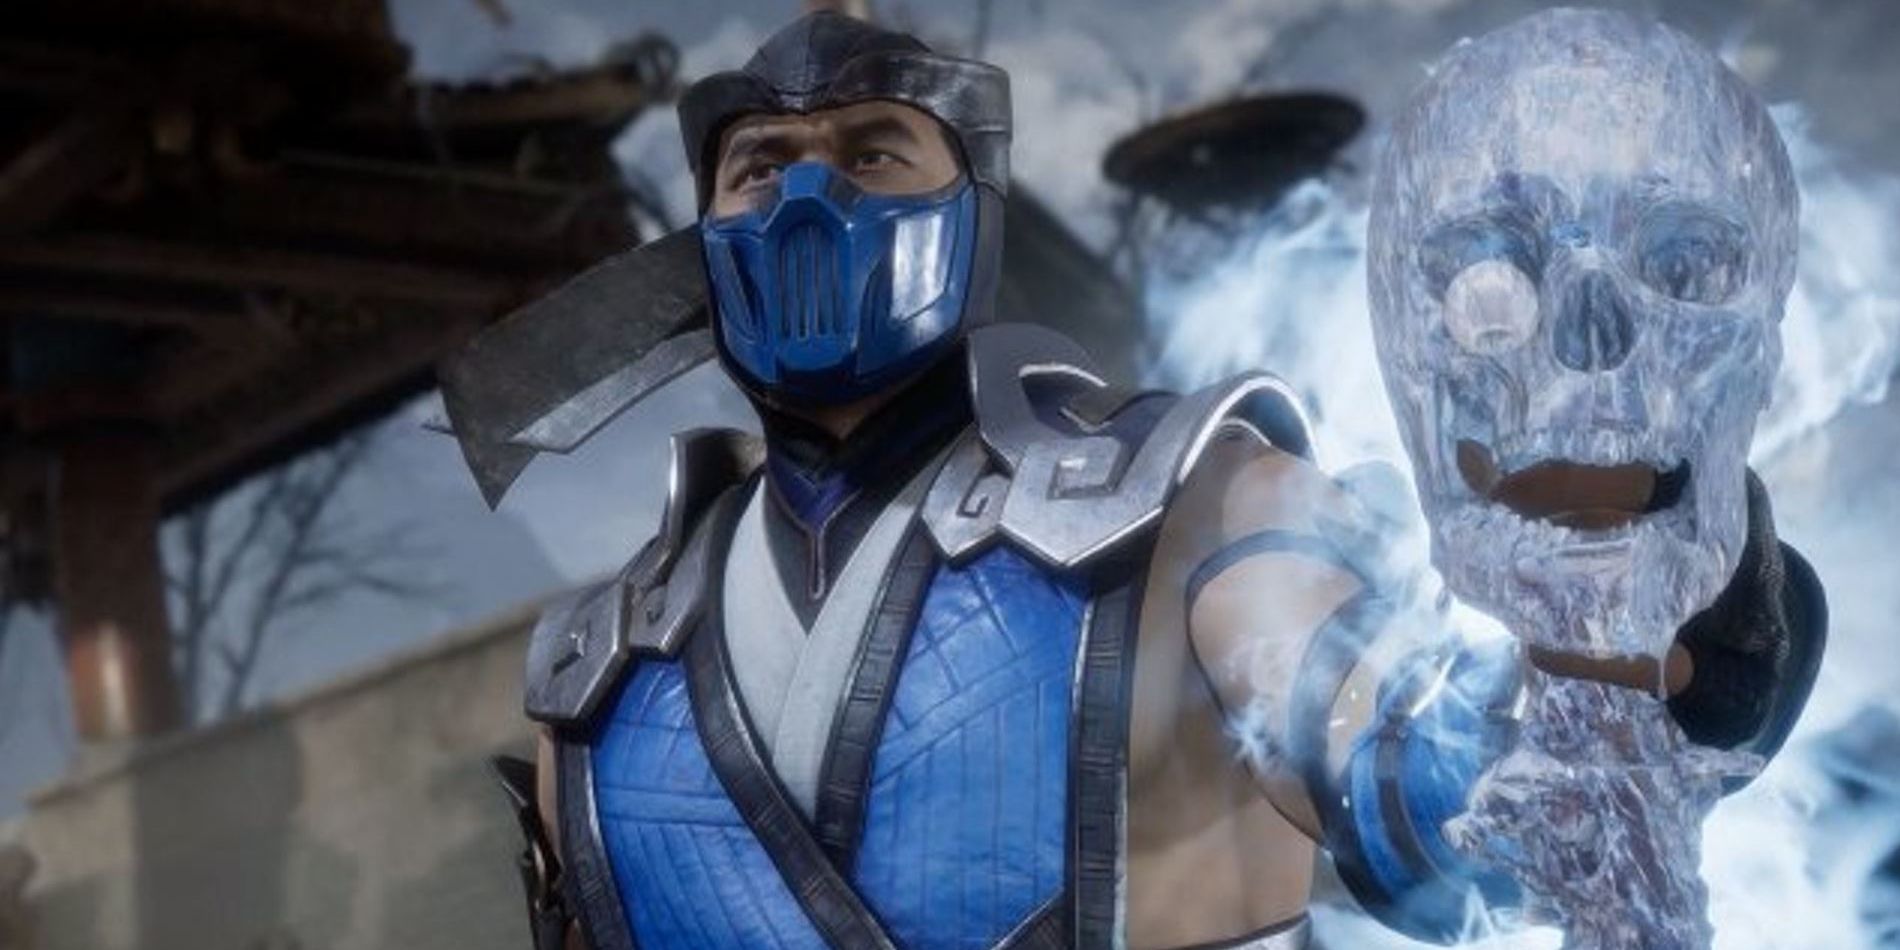 MK 11 Spawn Fatality: How to perform Mortal Kombat 11 Spawn Fatalities? -  Daily Star